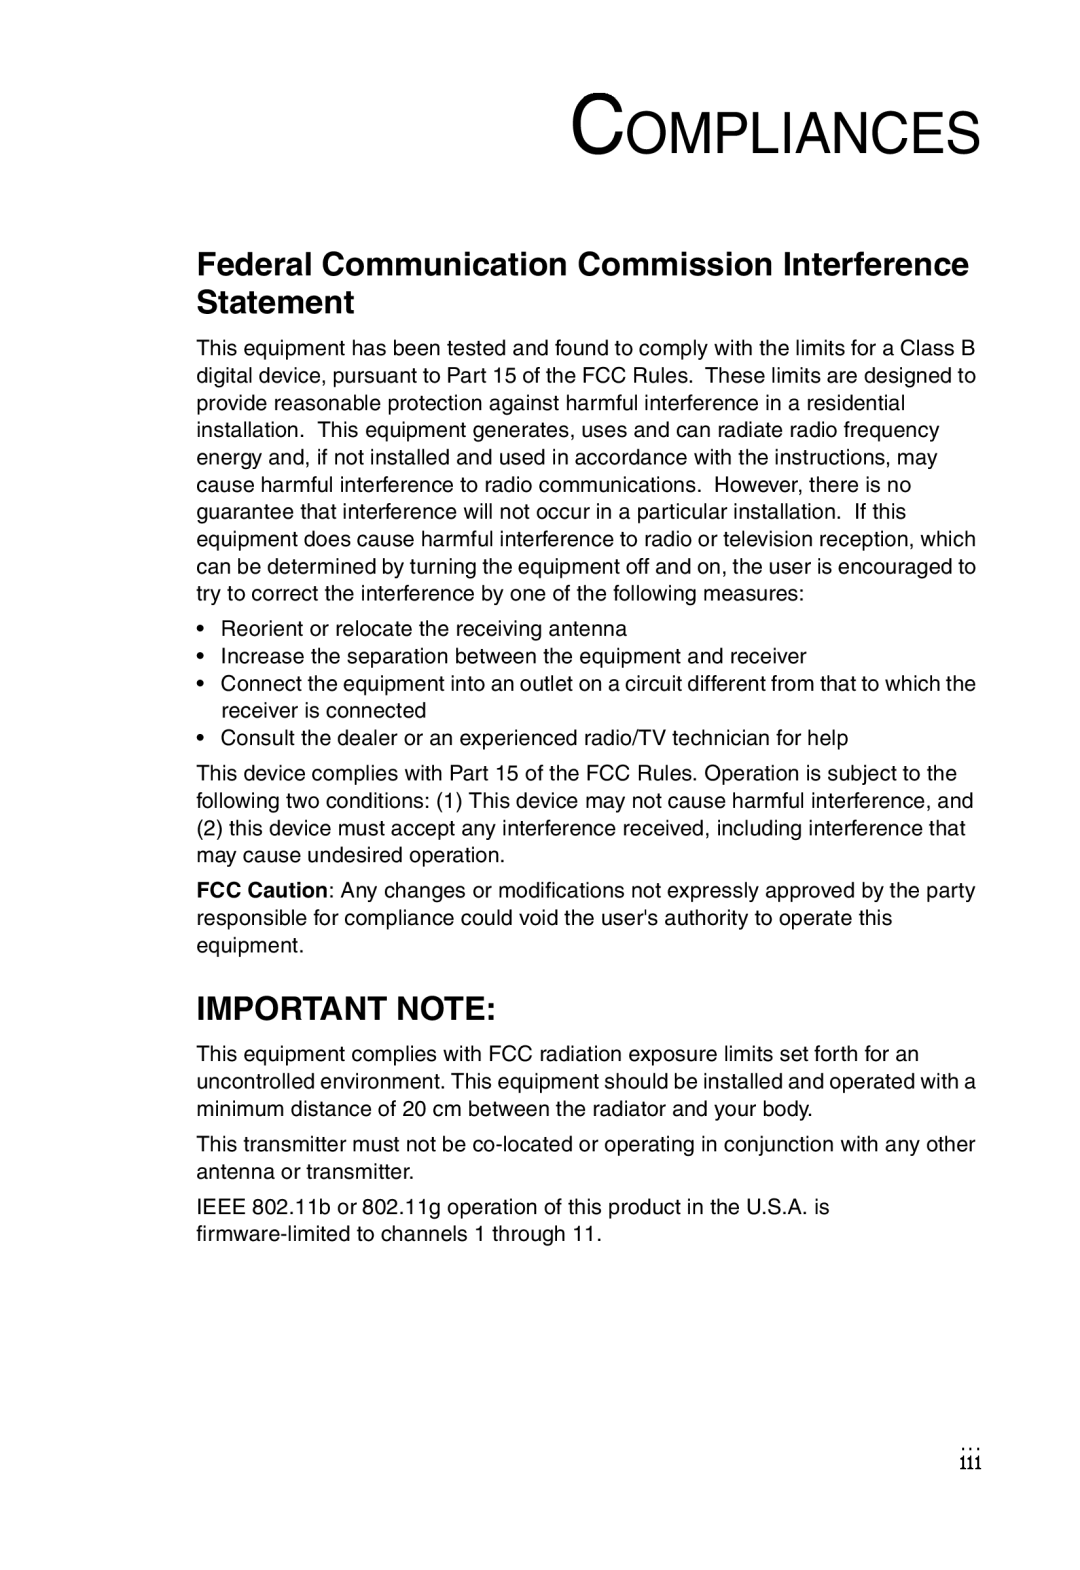 SMC Networks SMCWBR14T-G manual Federal Communication Commission Interference Statement, Important Note, Compliances 